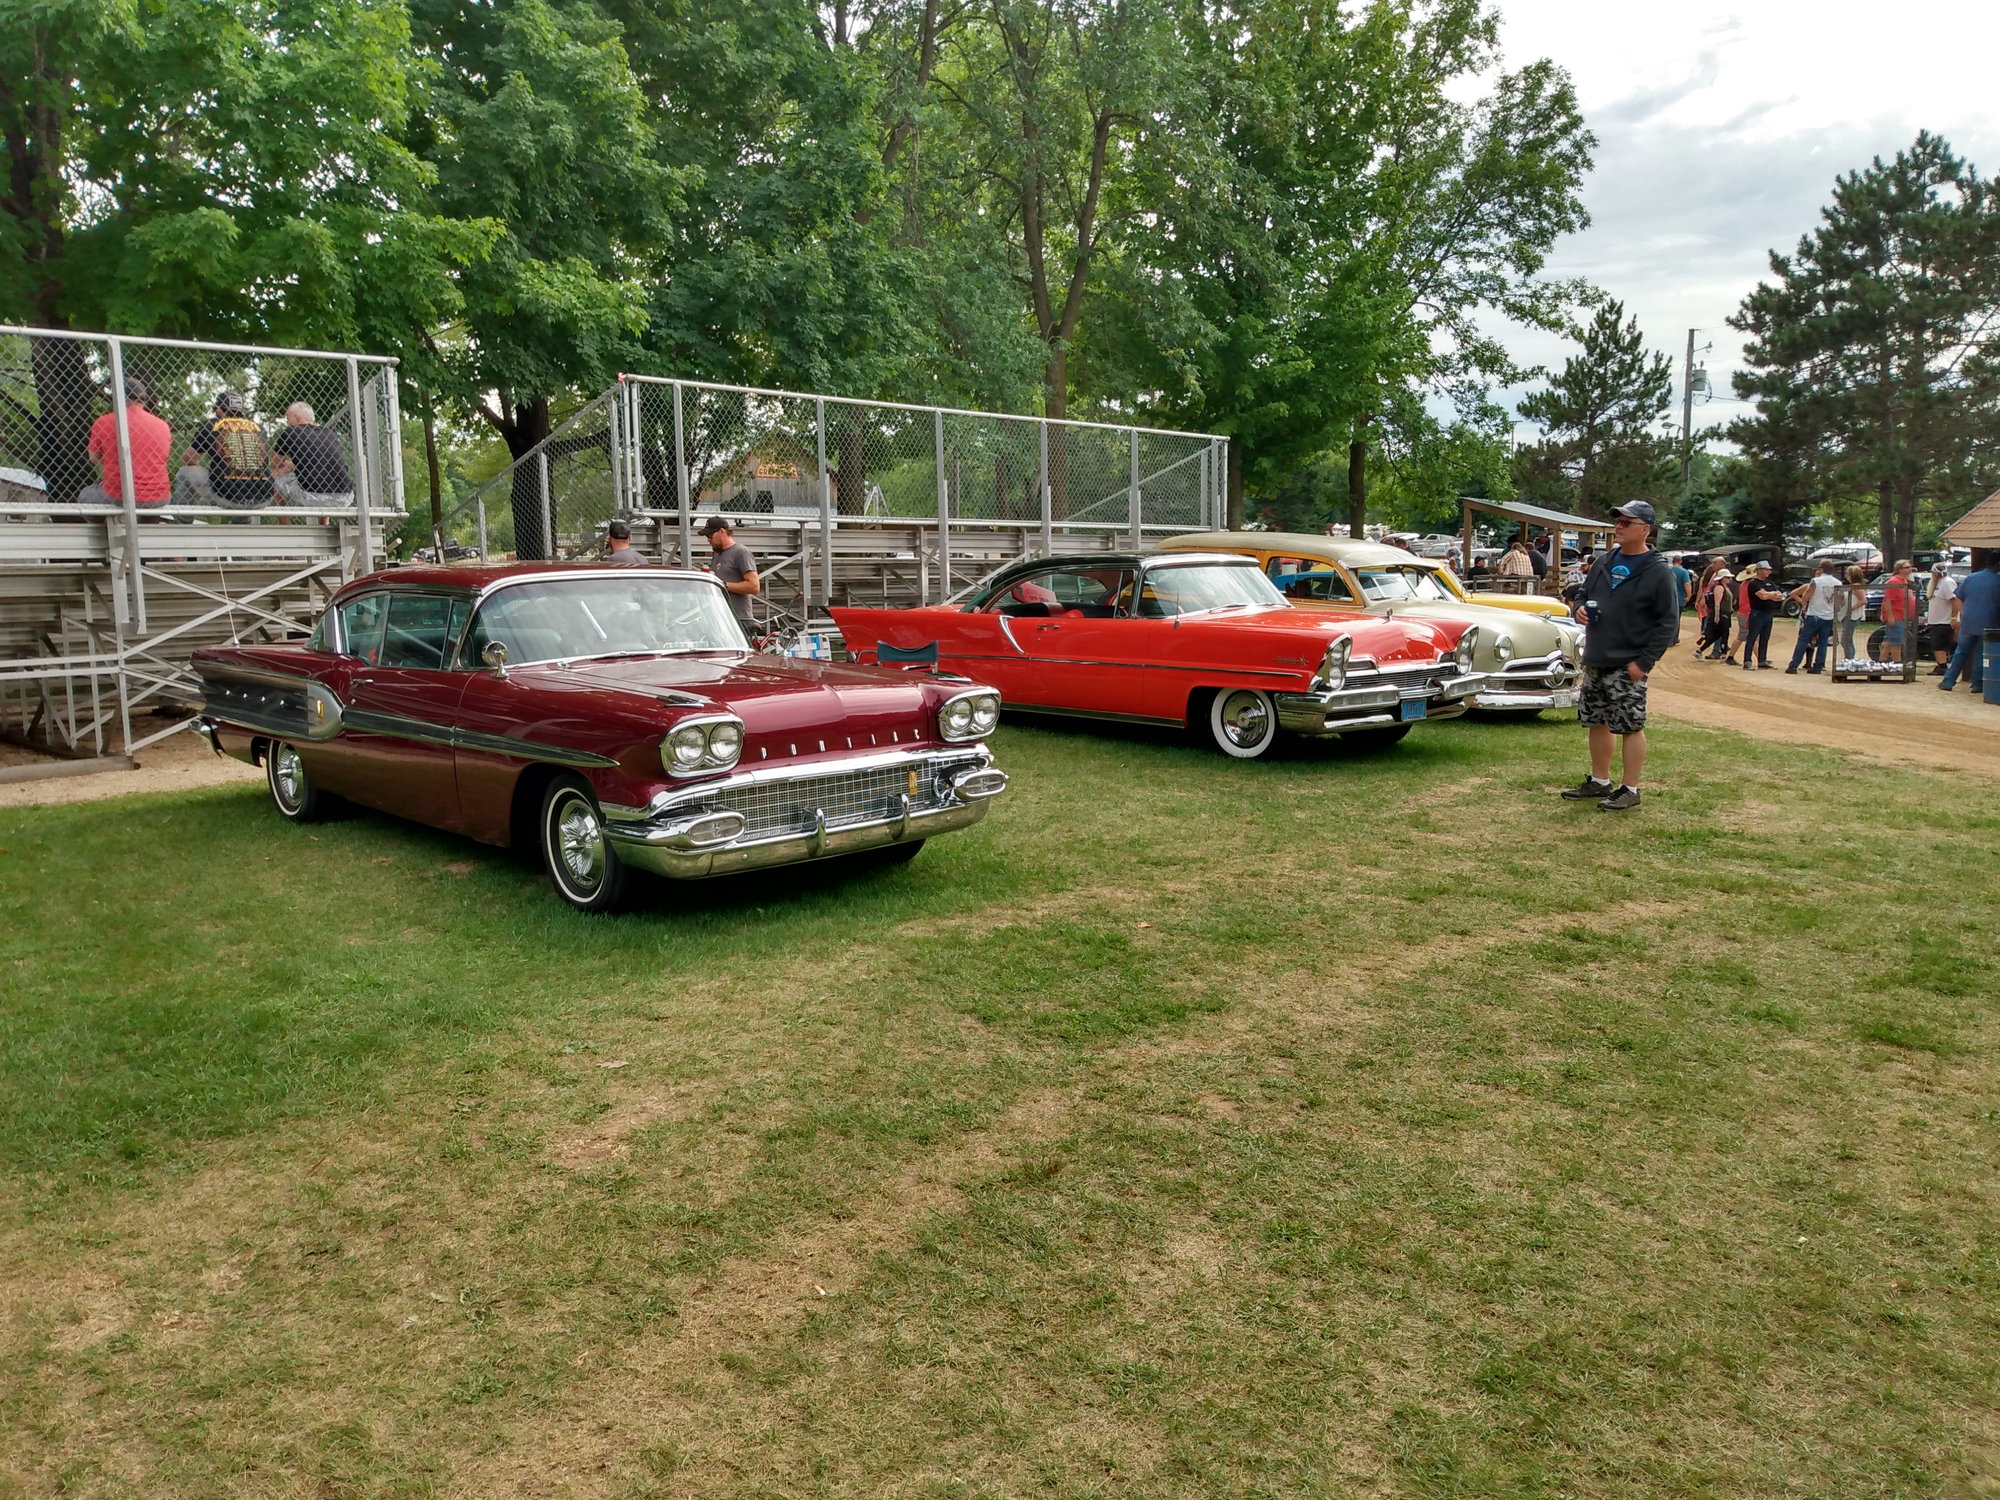 Pics From Symco WI Car Show